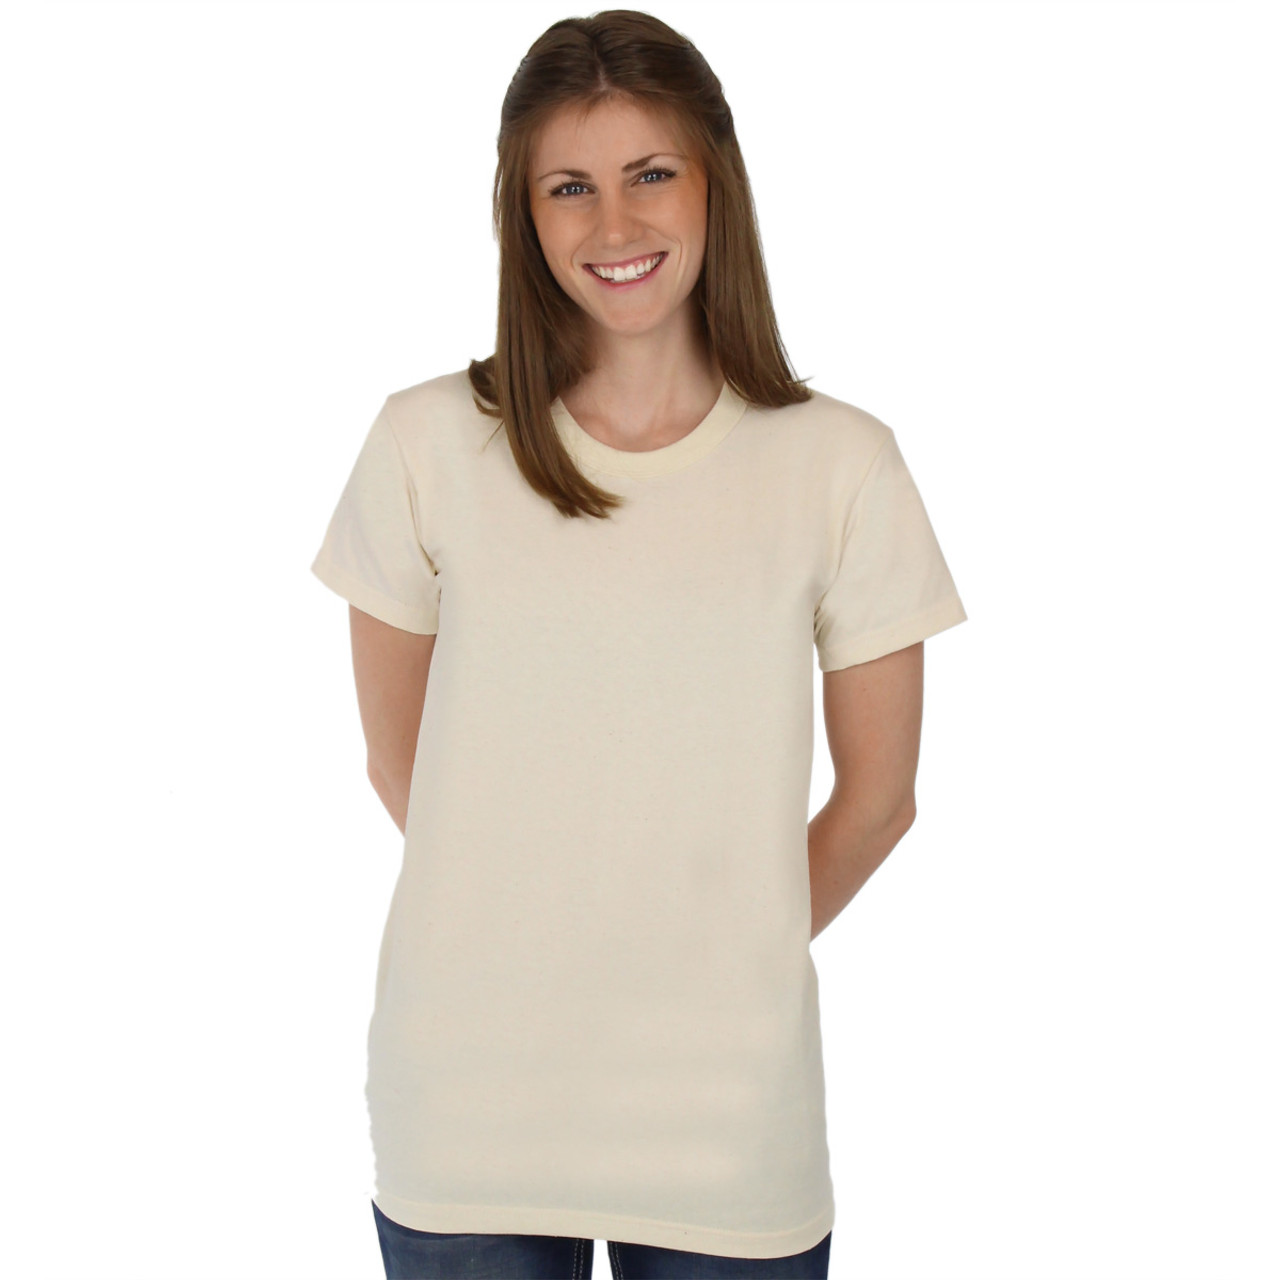 100% Organic Cotton Crew Neck Tee Grown and Made in USA